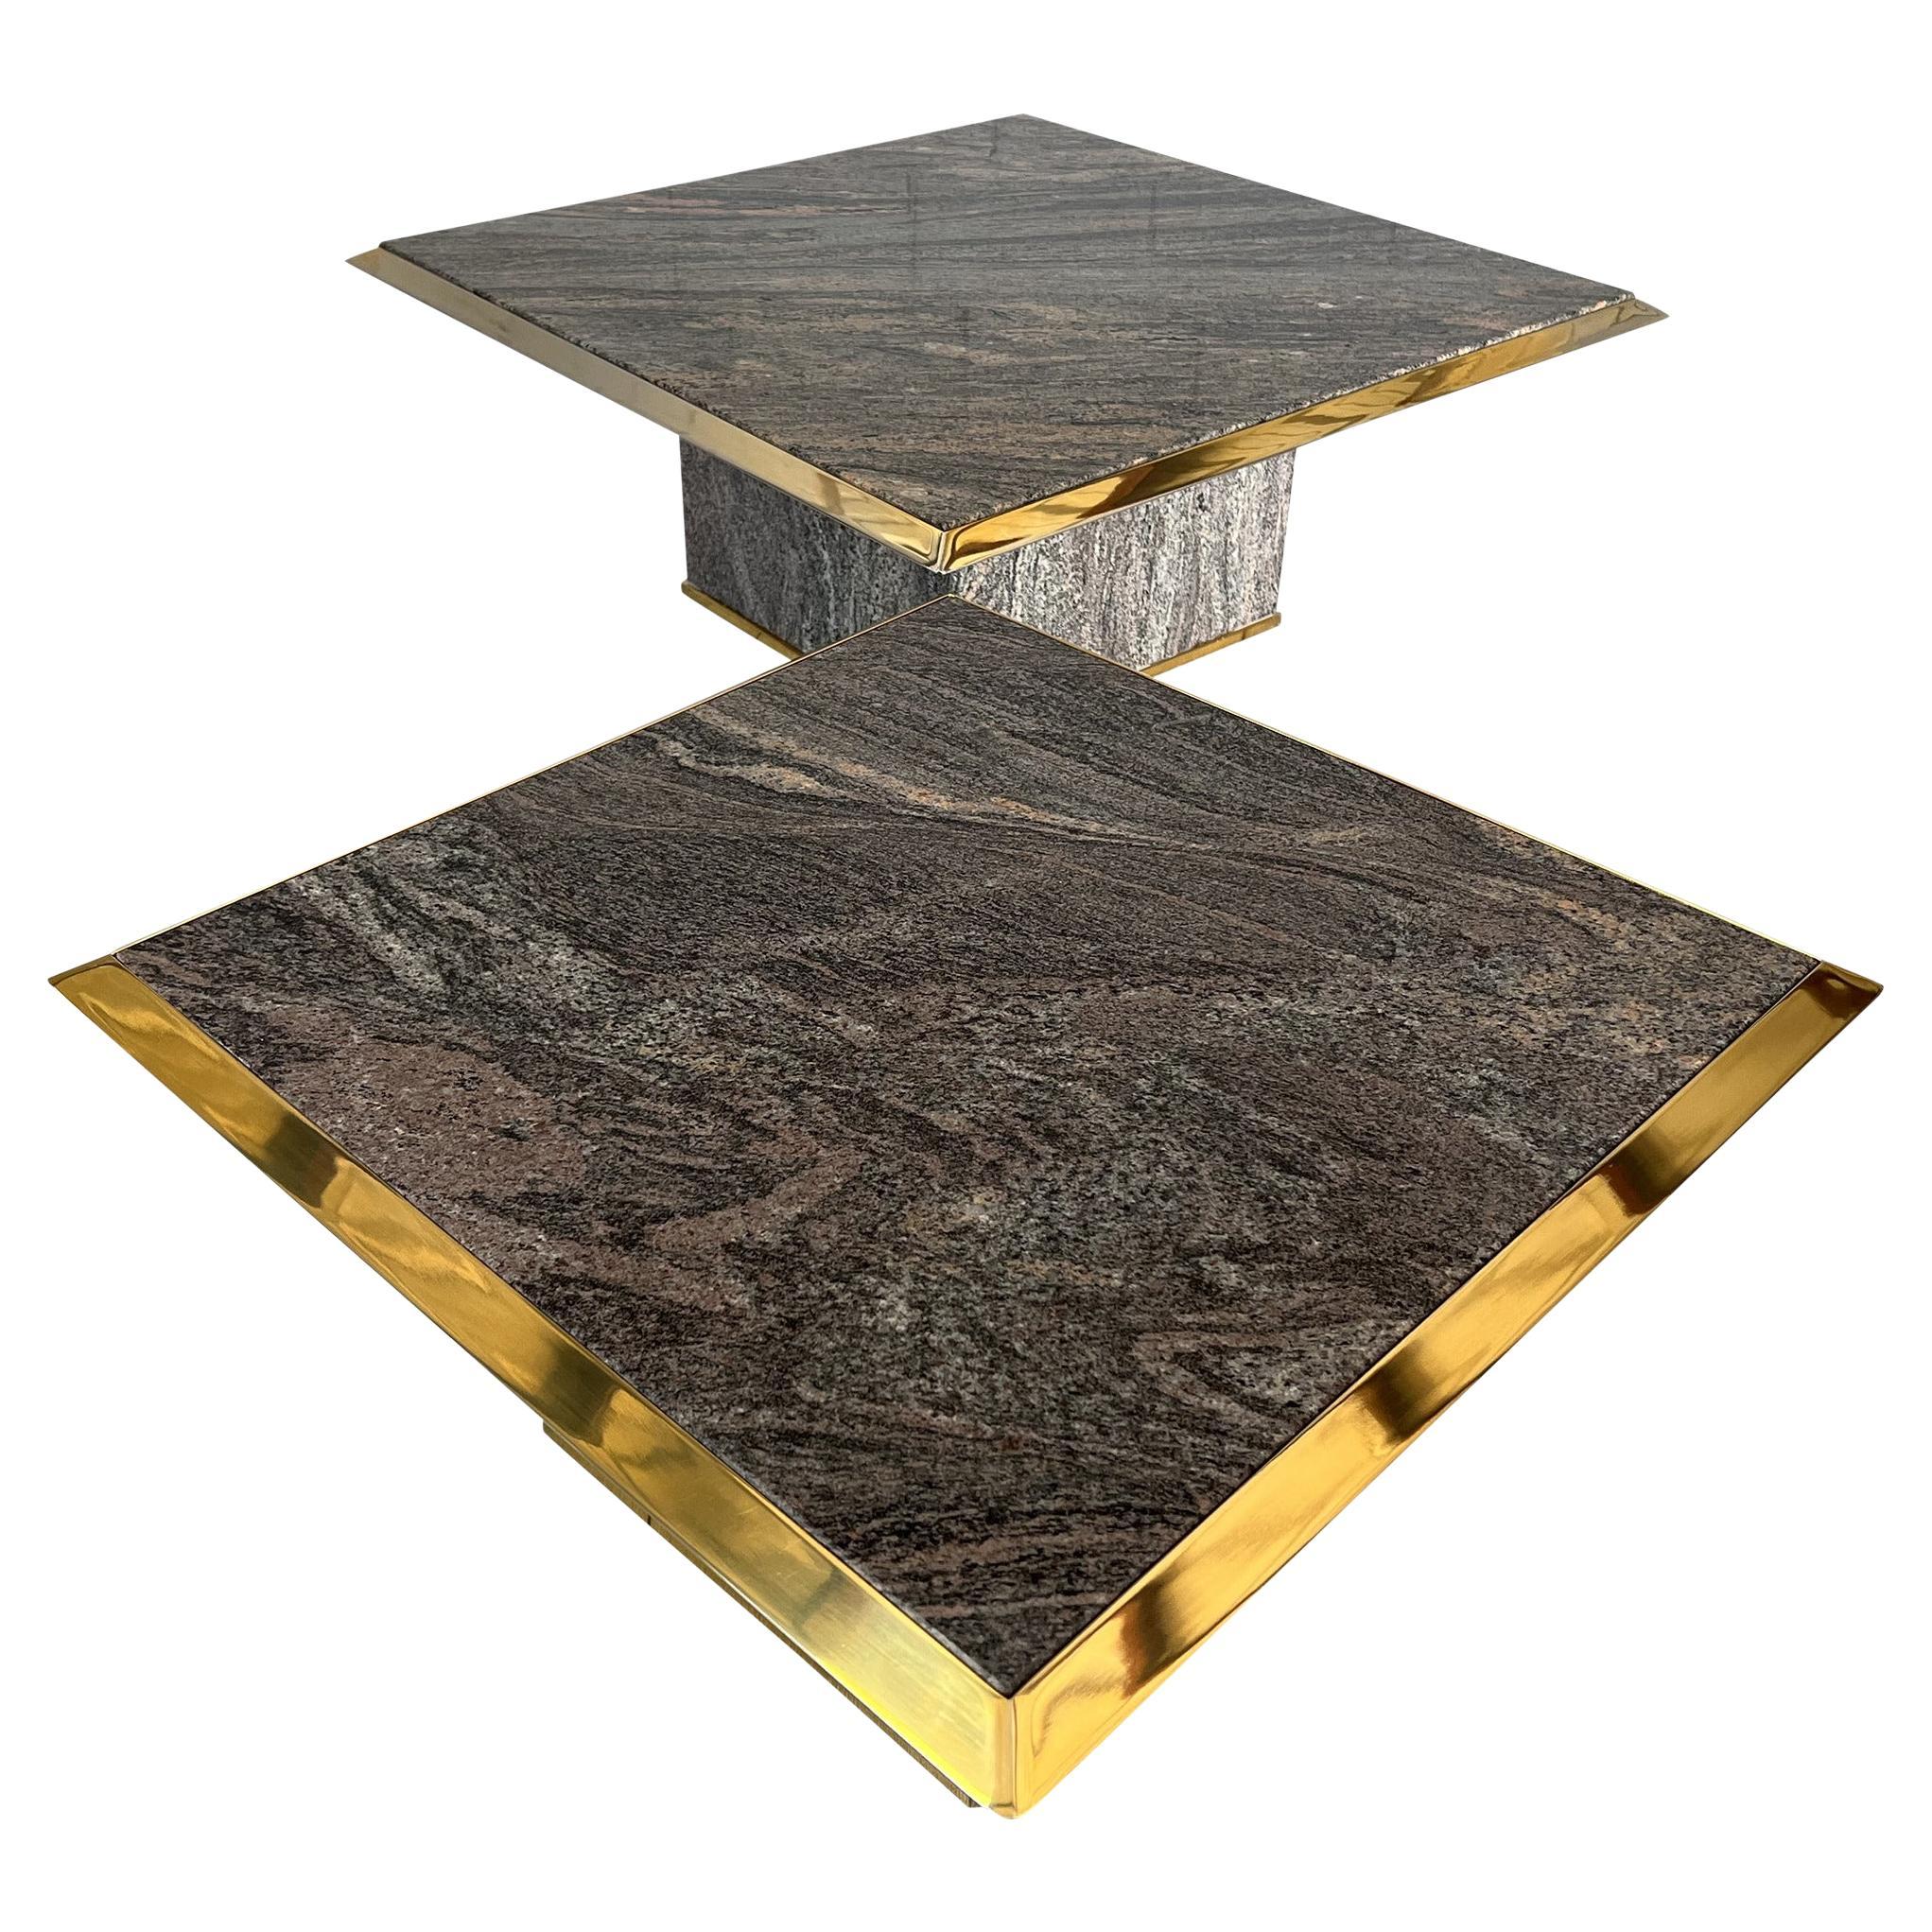 Hollywood Regency Travertine and Metal Coffee Tables by Fedam Design - a Pair